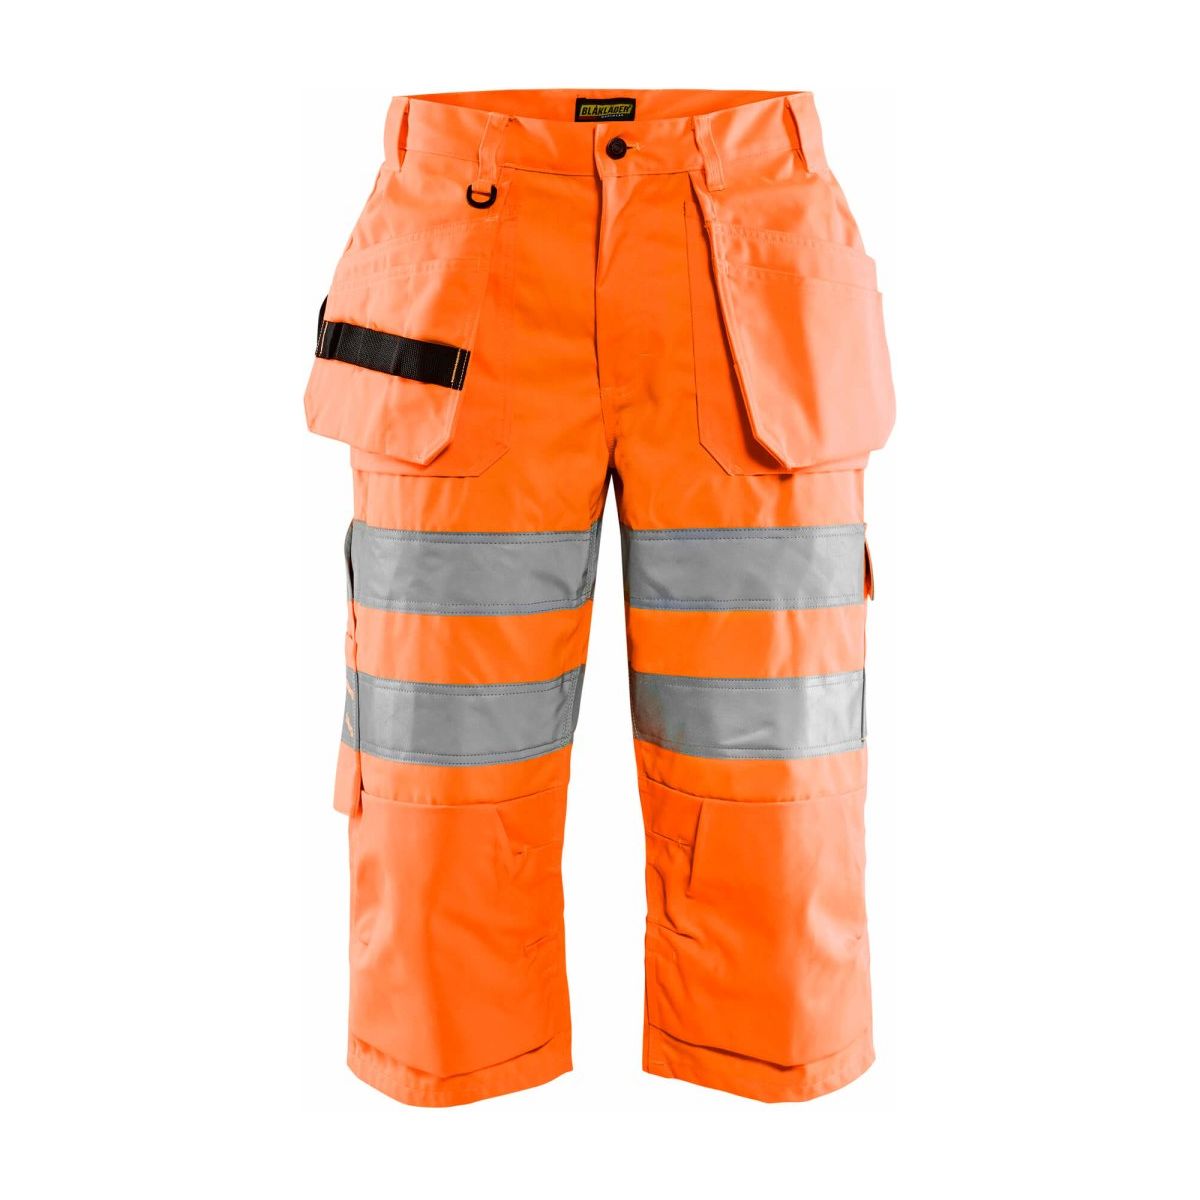 Portwest PW340 PW3 HiVis Work Trousers High Visibility  SHORT Leg Length  from Lawson HIS